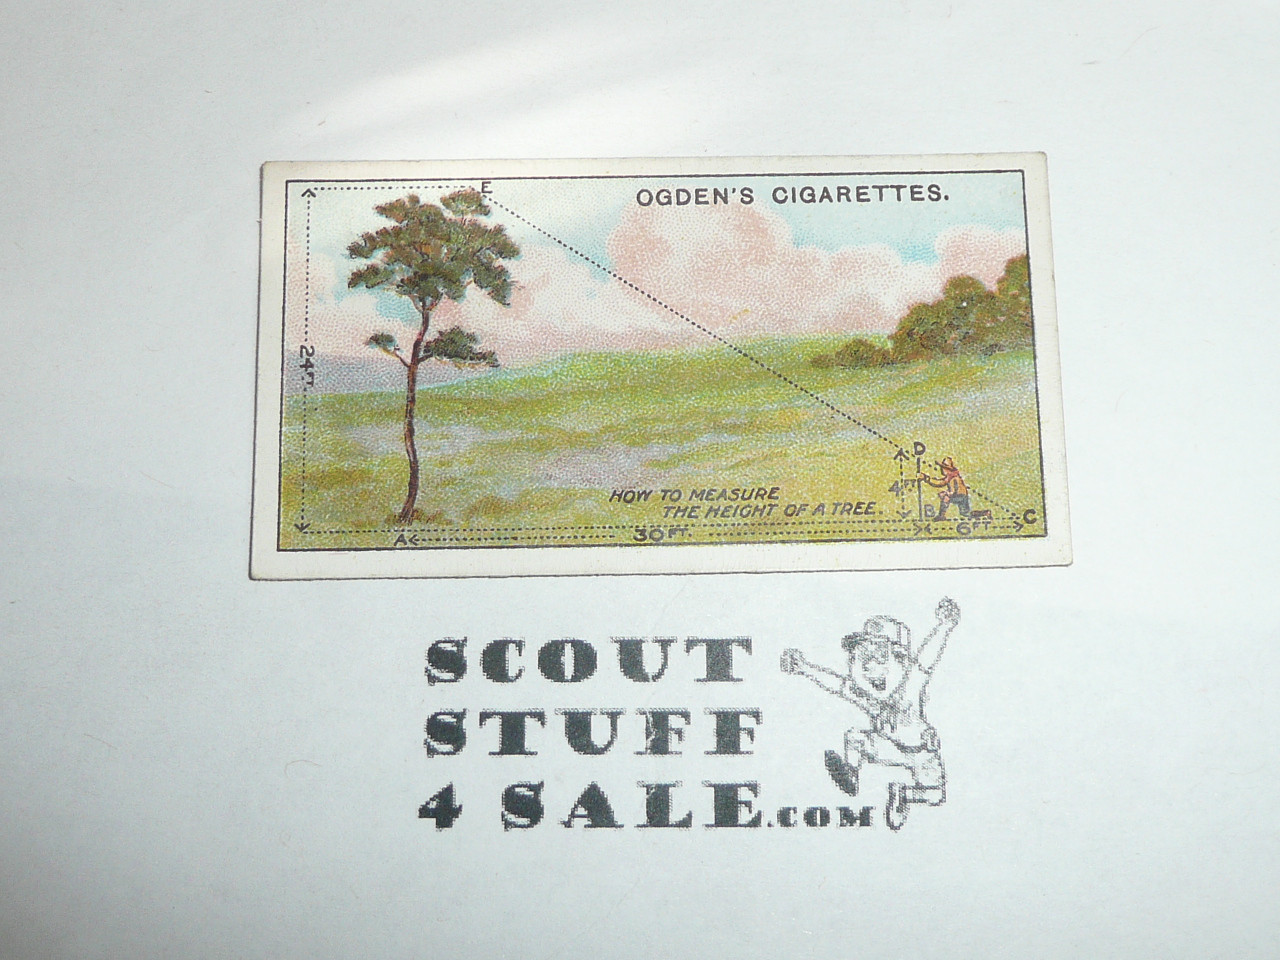 Ogden Tabacco Company Premium Card, Second Boy Scout Series of 50 (Blue Backs), Card #92 To Measure the Height of a Tree, 1912